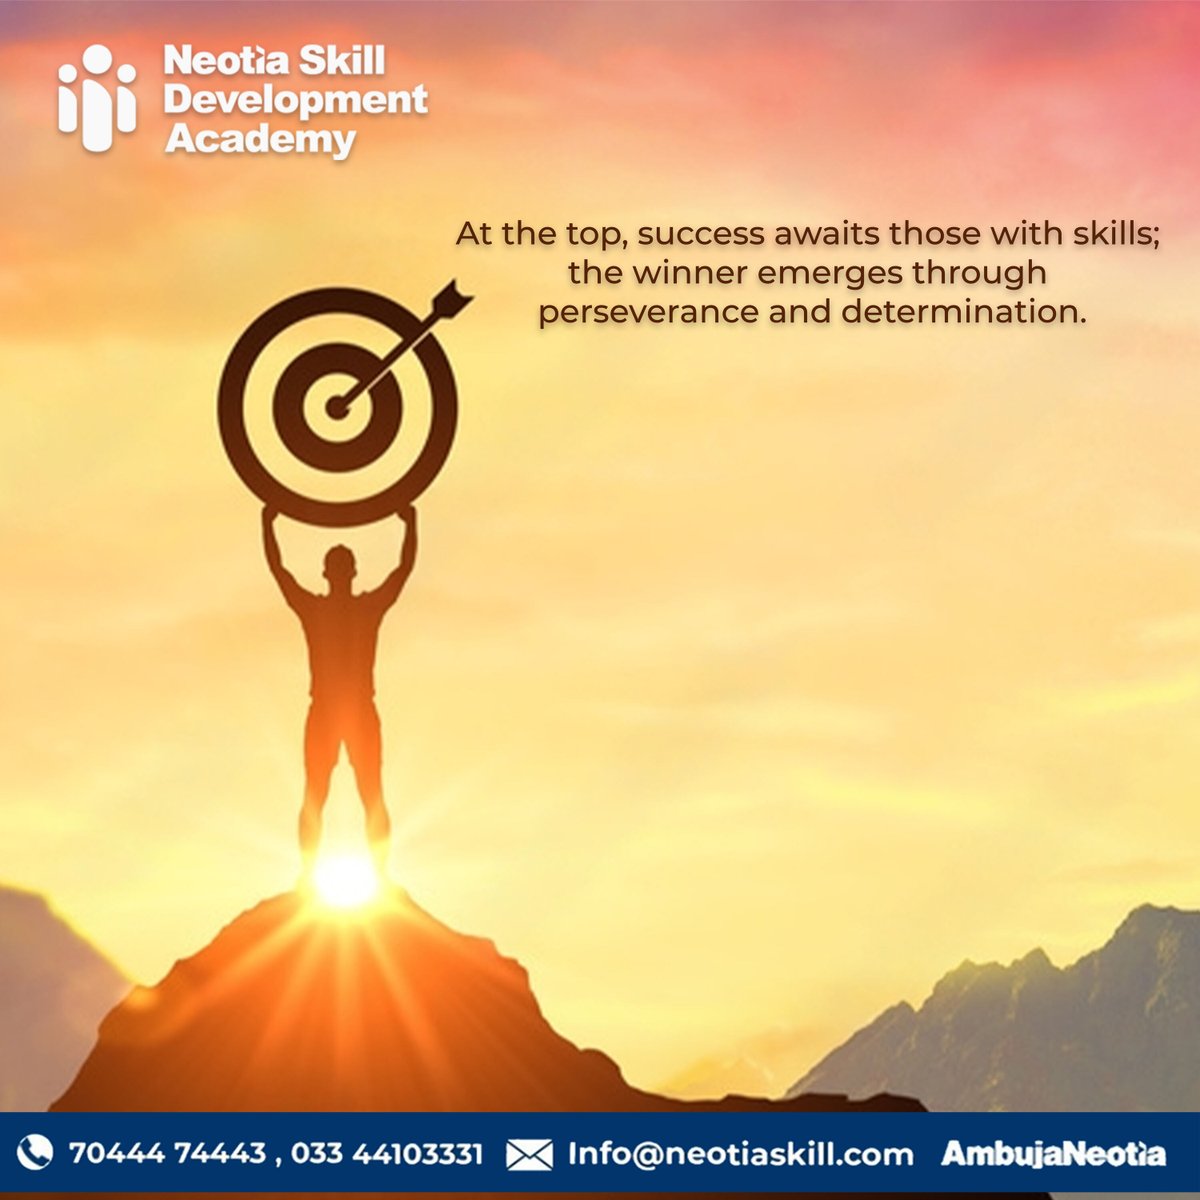 Unlock your path to success with Neotia Skill Development Academy! At the top, success awaits those with skills; the winner emerges through perseverance and determination. Join us and pave your way to triumph! #SkillsForSuccess #NeotiaSkillDevelopment #CareerGrowth #AmbujaNeotia